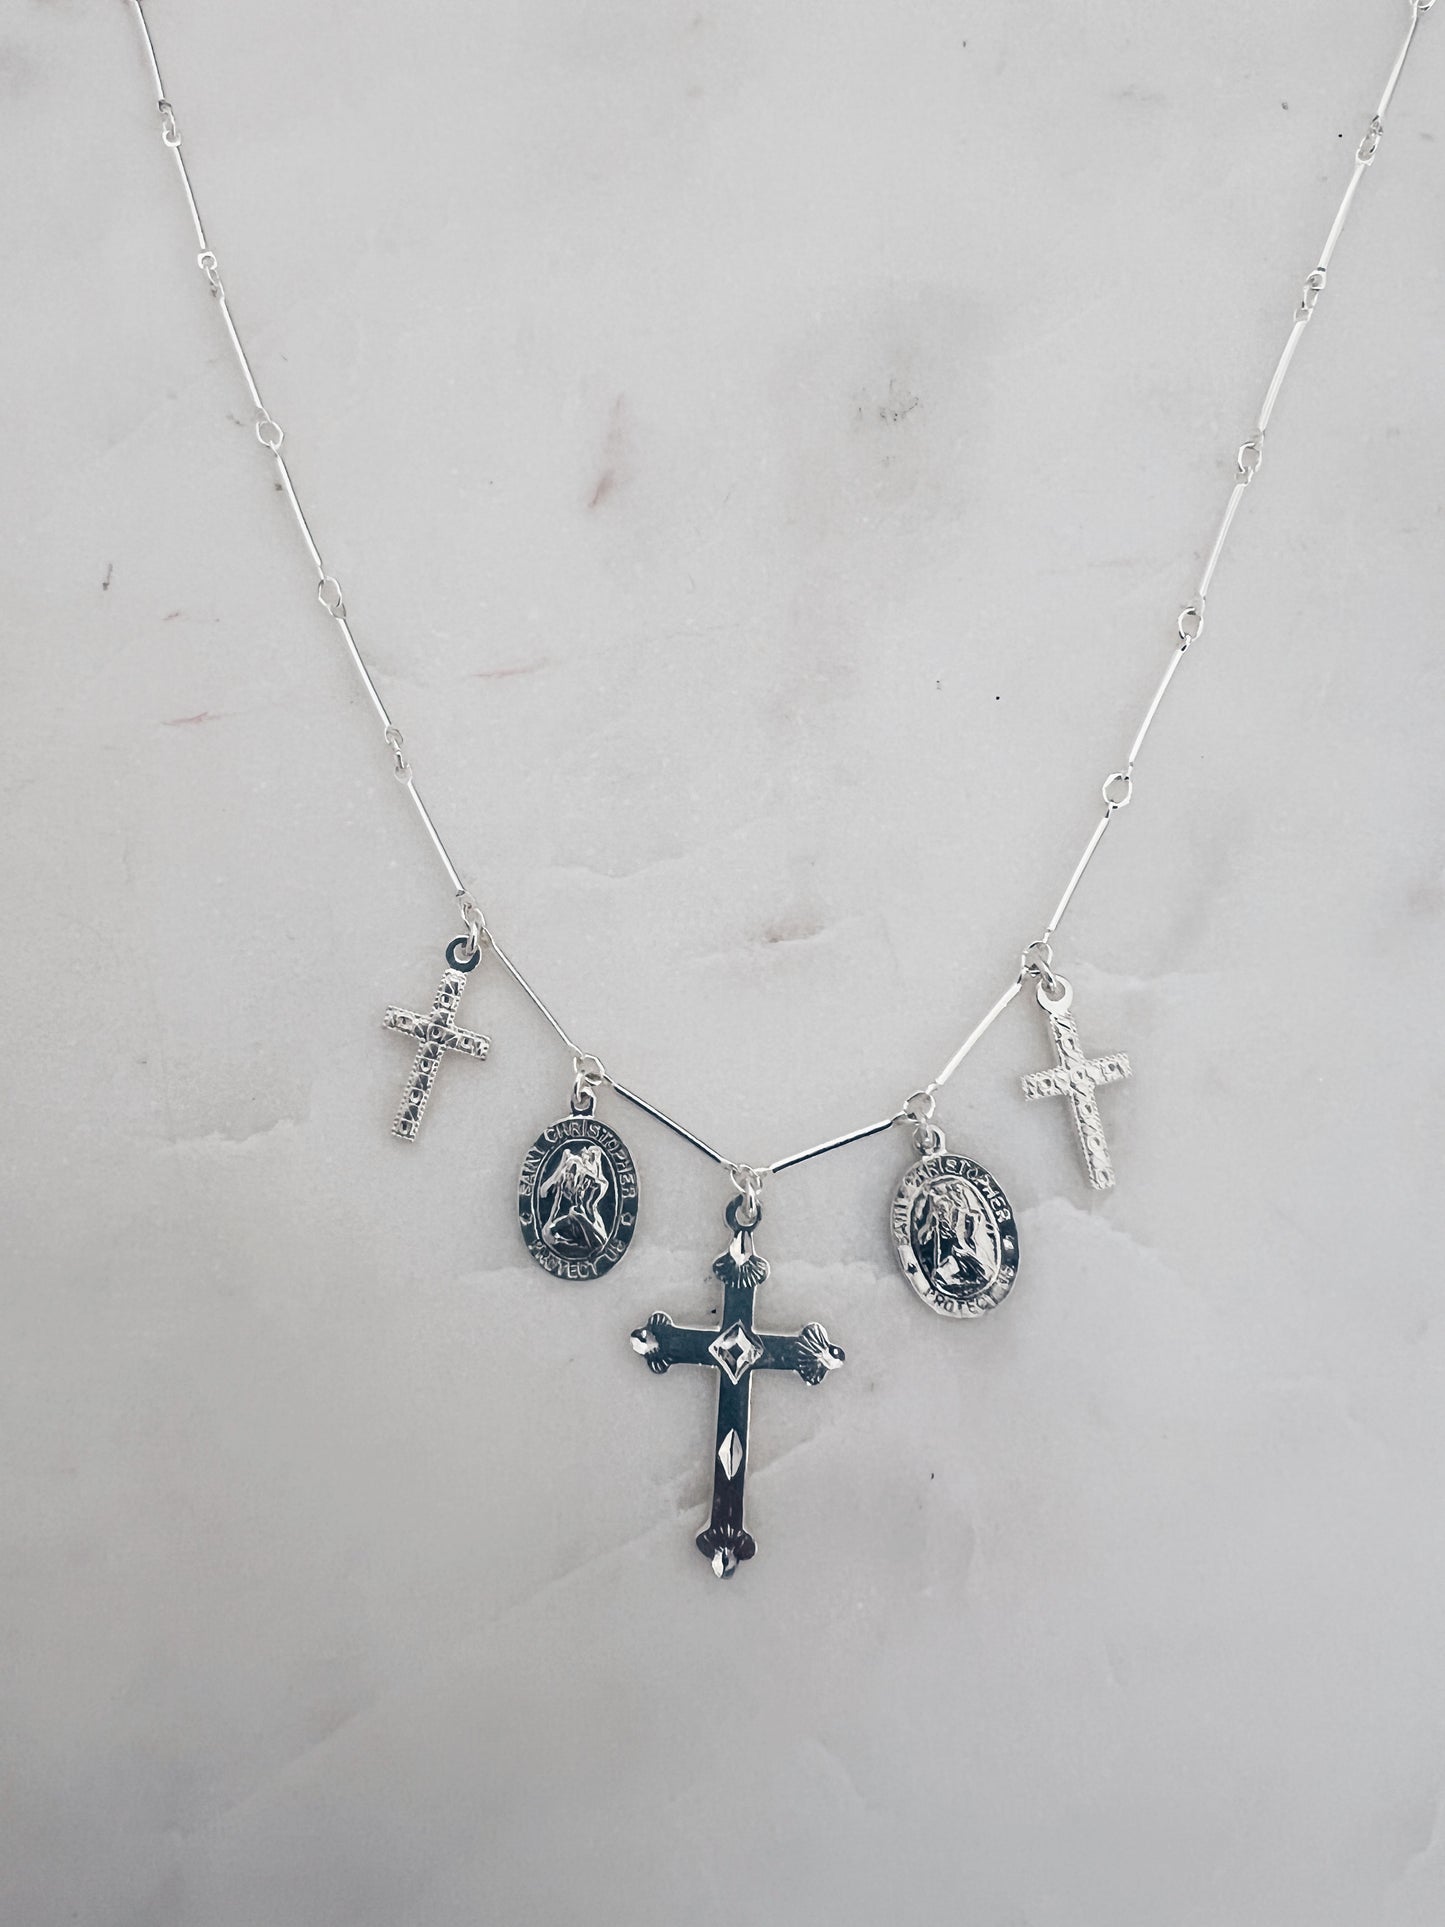 Sacred Charm Necklace + More Options